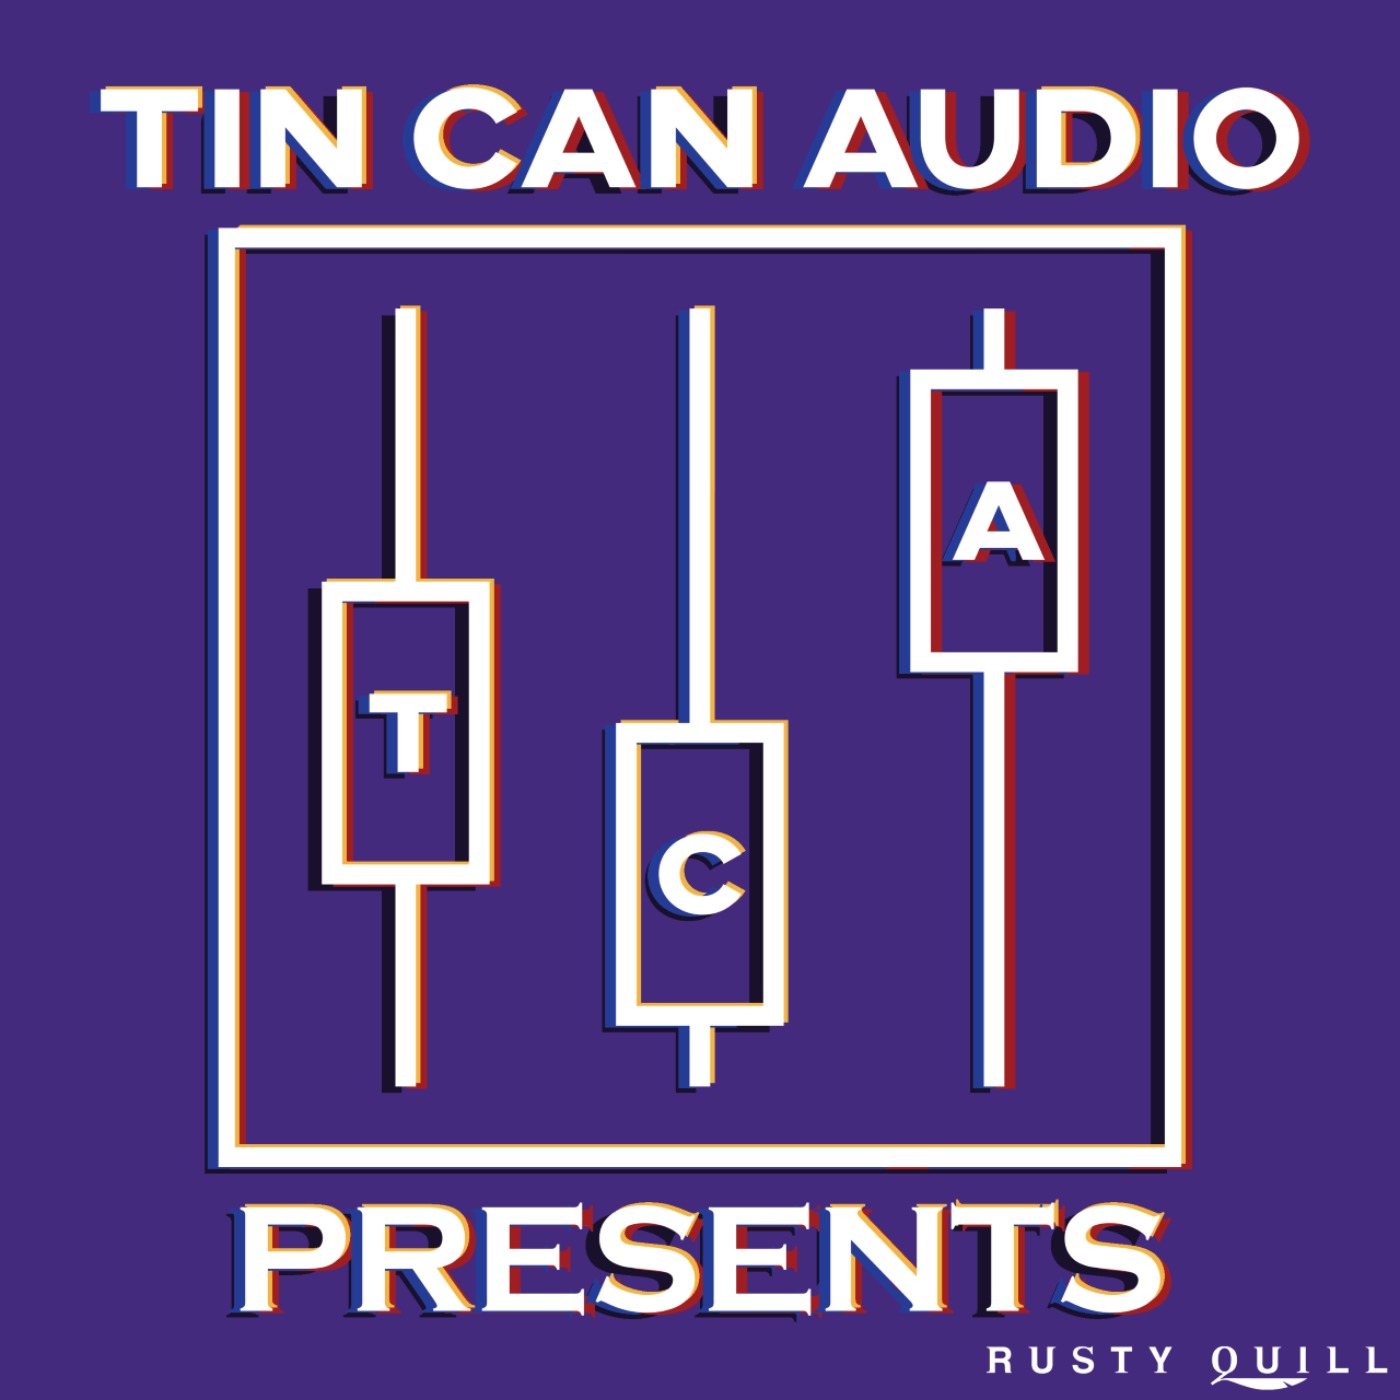 Tin Can Audio Presents: Middle:Below